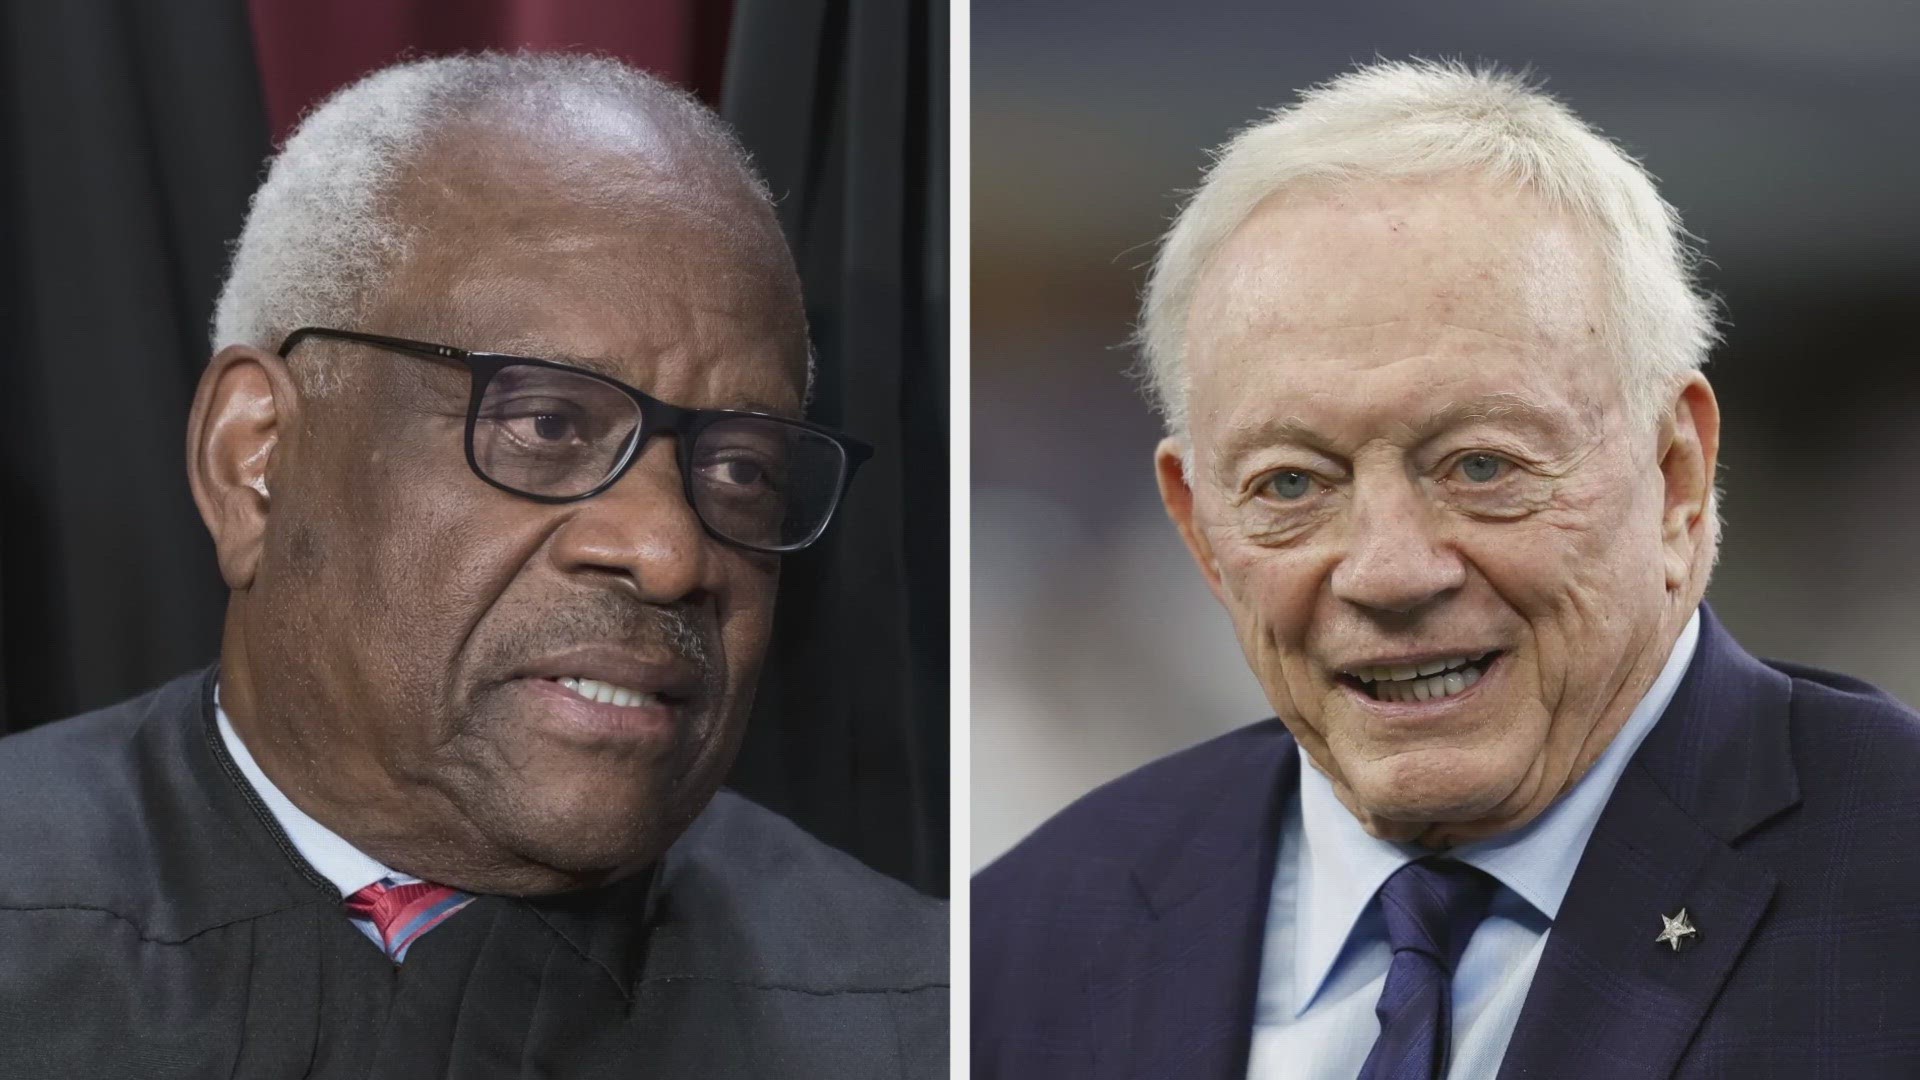 The New York Times reported Jerry Jones gifted Thomas a Super Bowl ring.